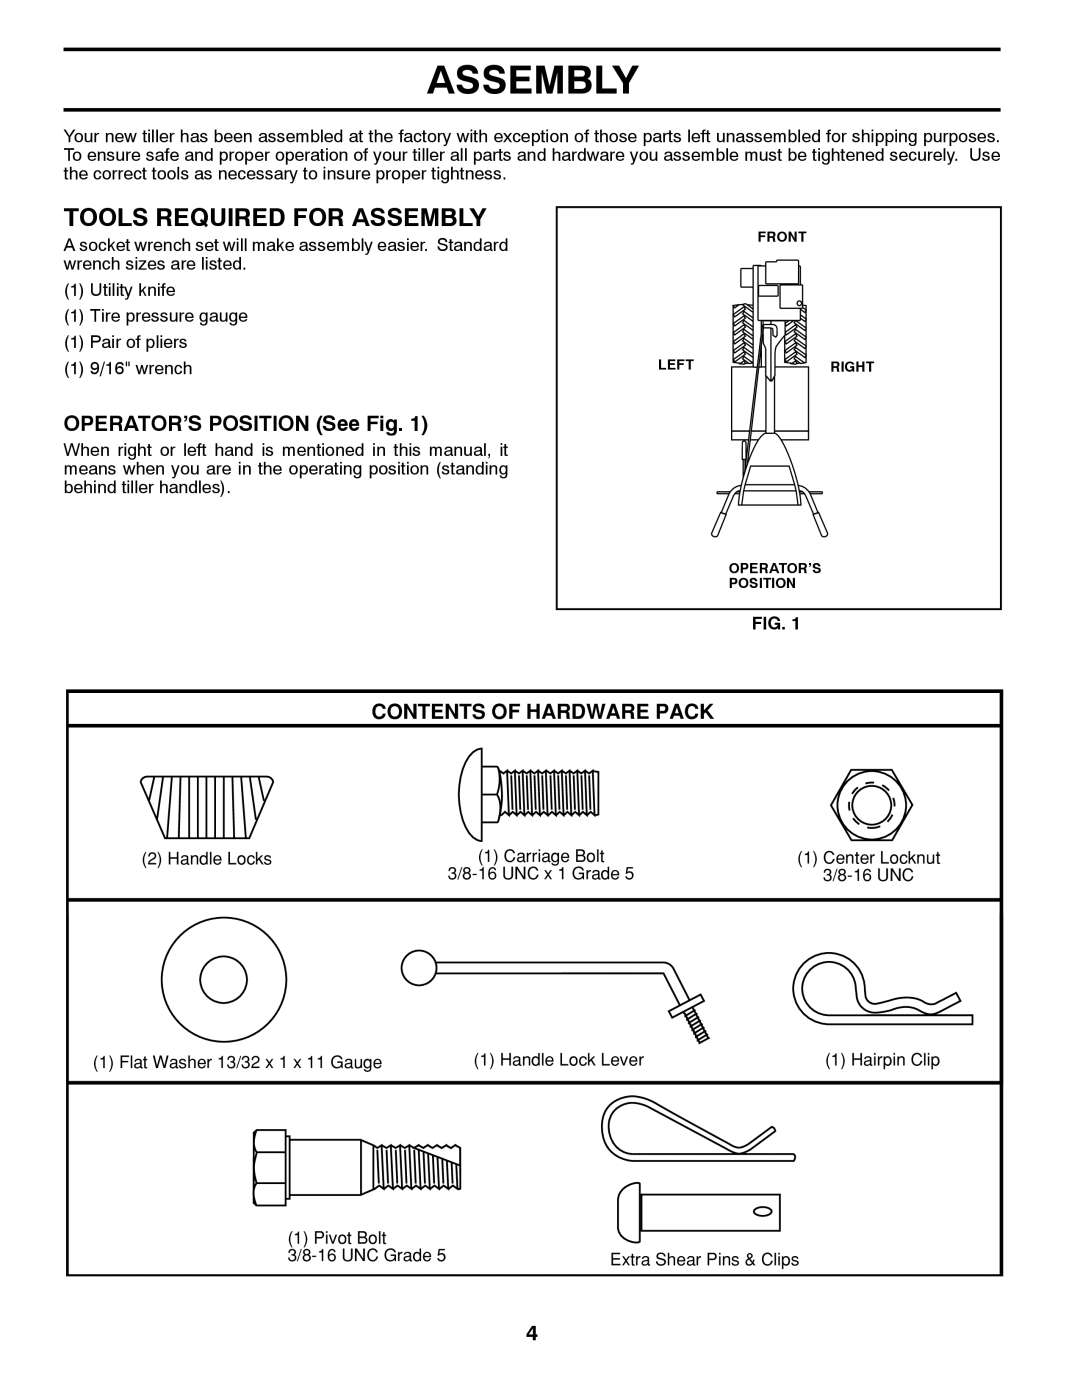 Poulan 423813 manual Tools Required For Assembly, OPERATOR’S POSITION See Fig, Contents Of Hardware Pack 